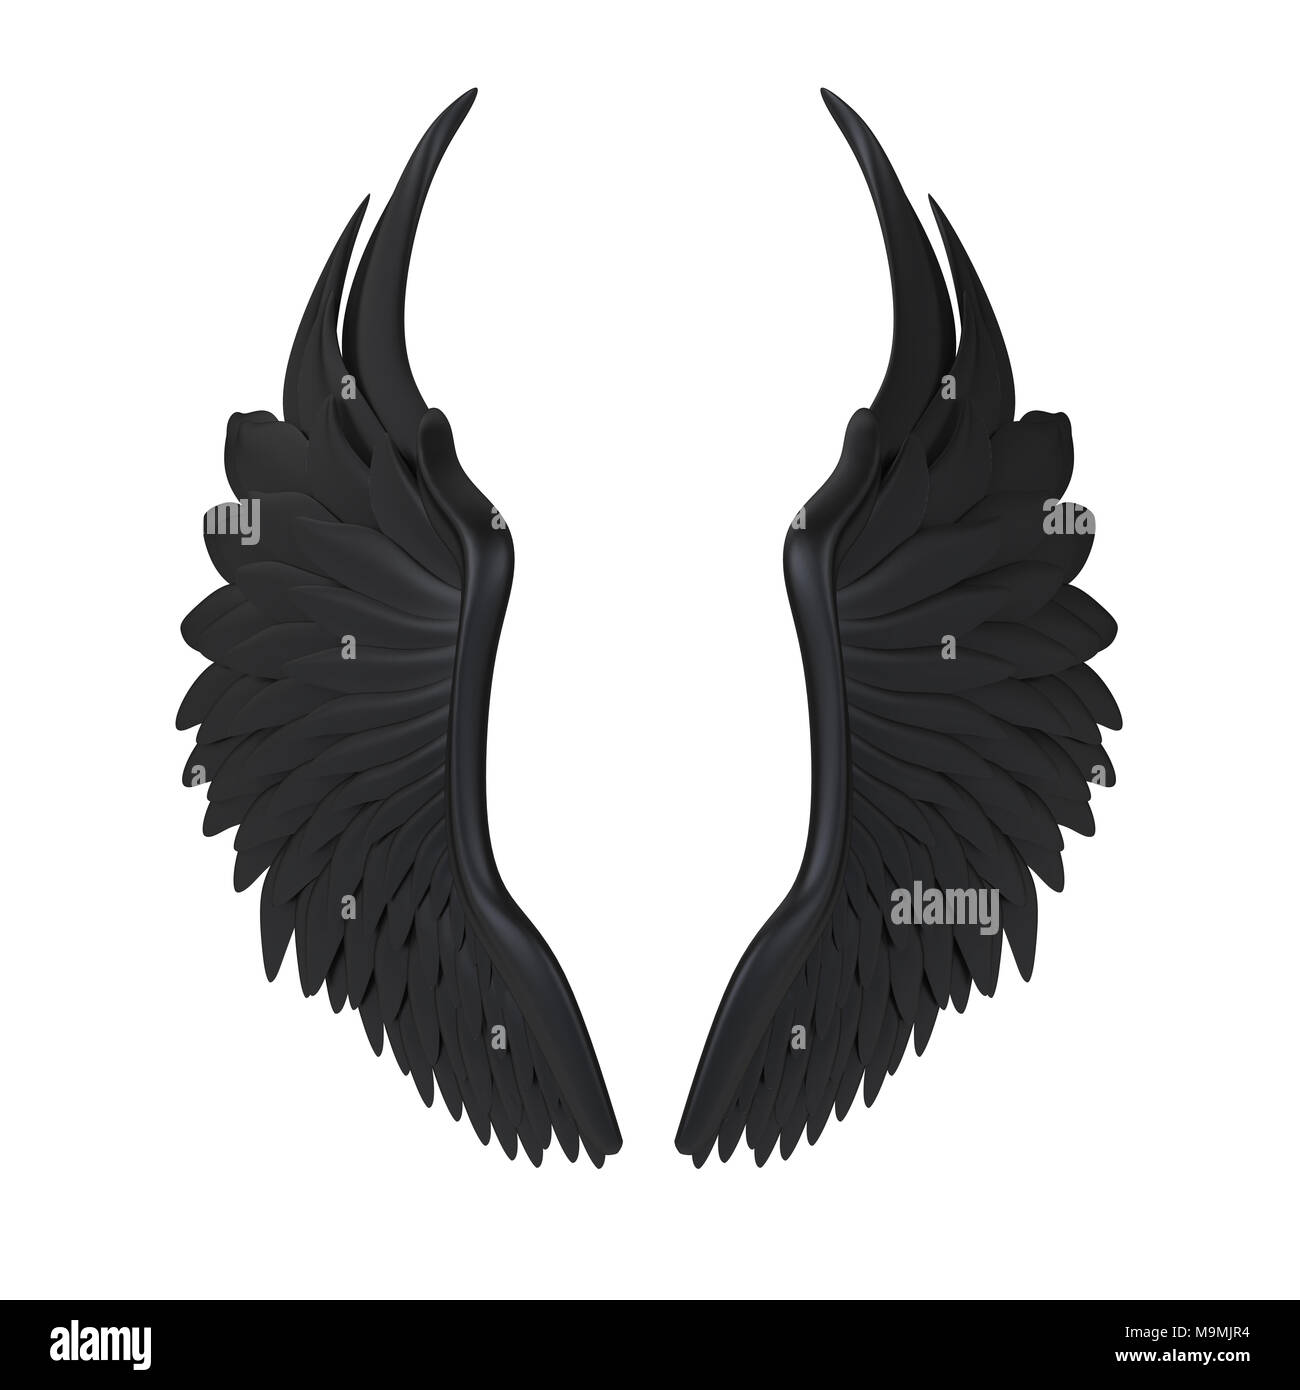 Demon Wings and Tail 3D model